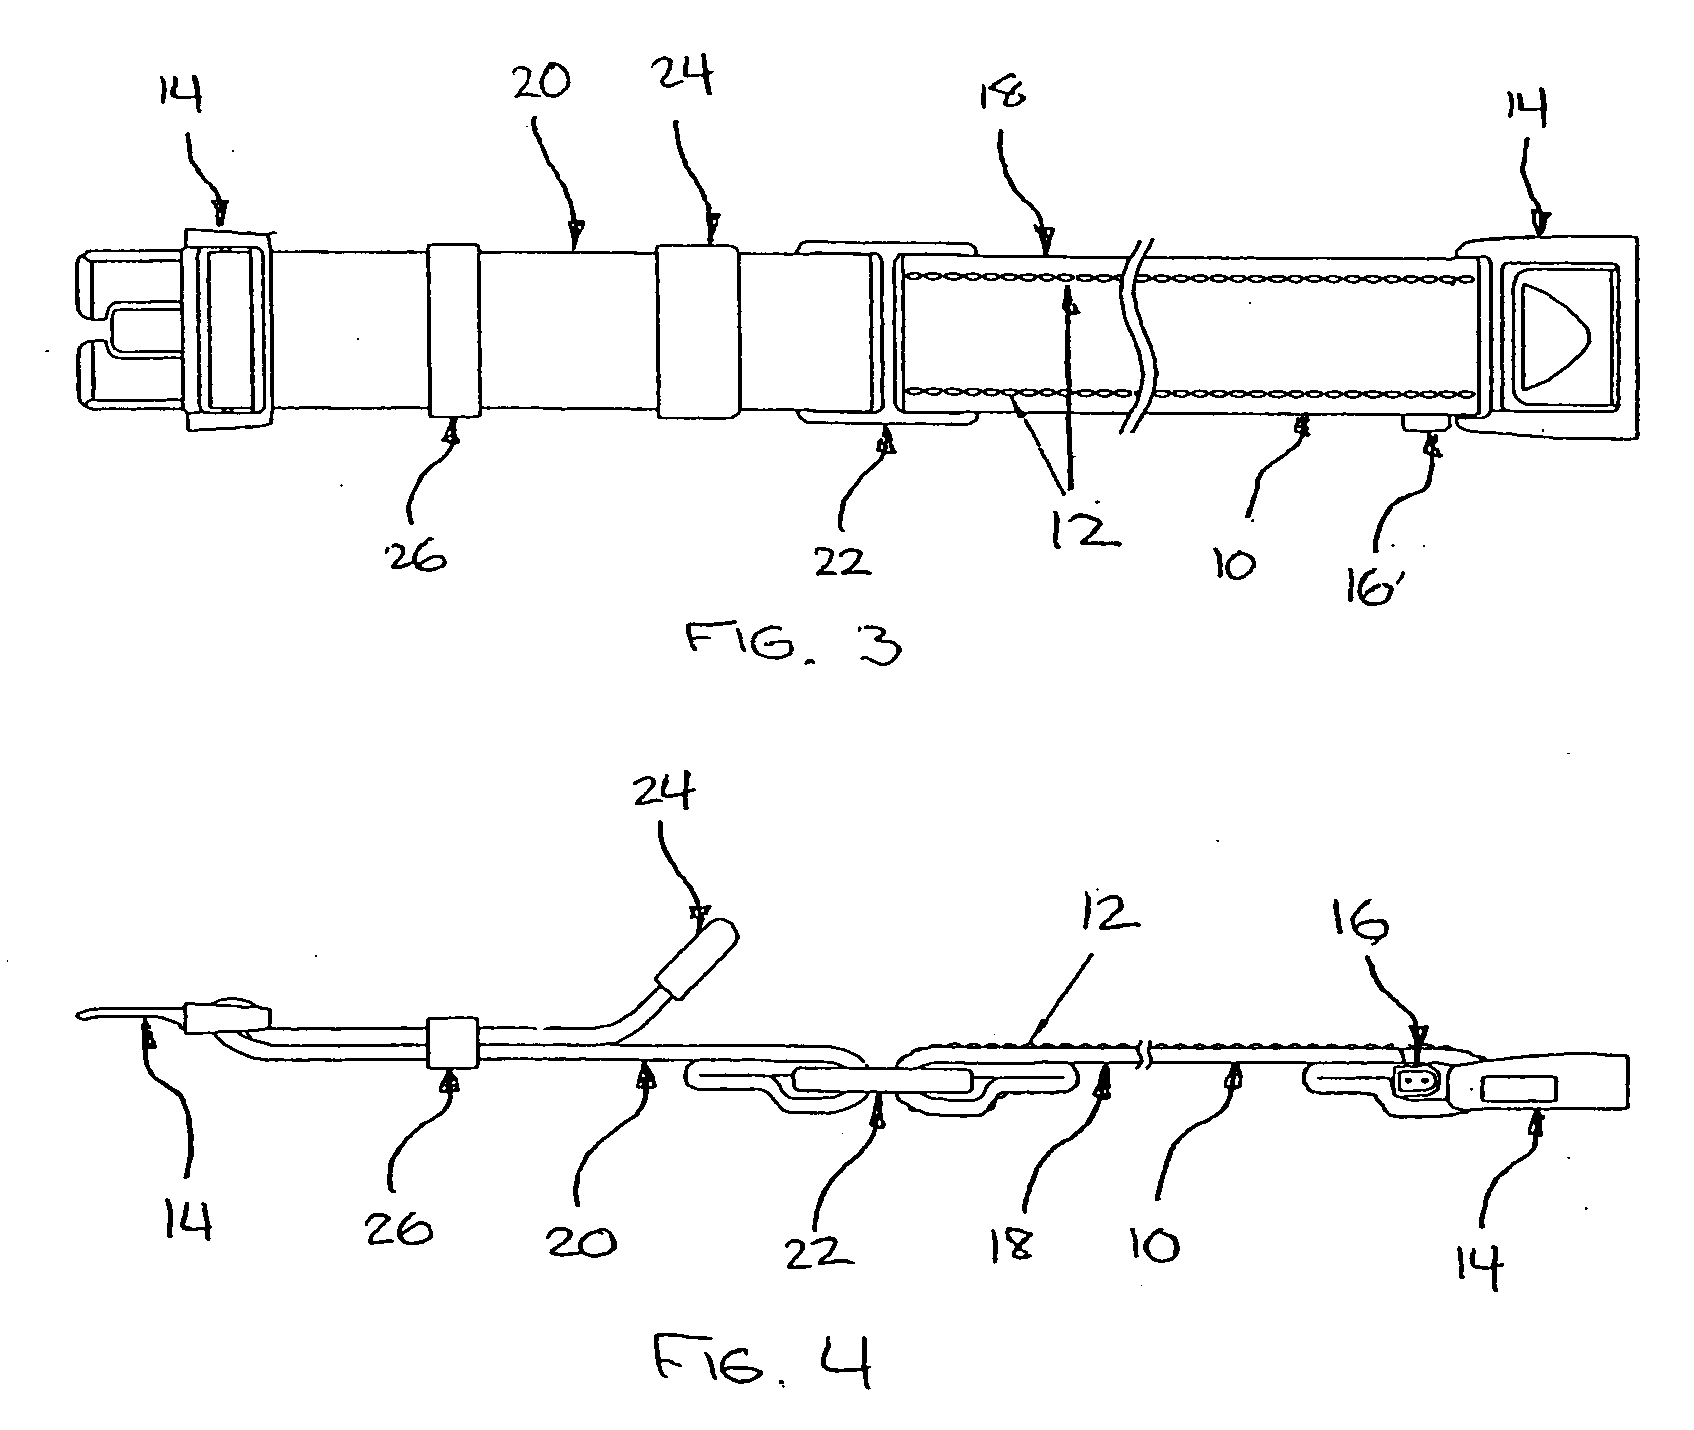 Reusable inductive transducer for measuring respiration